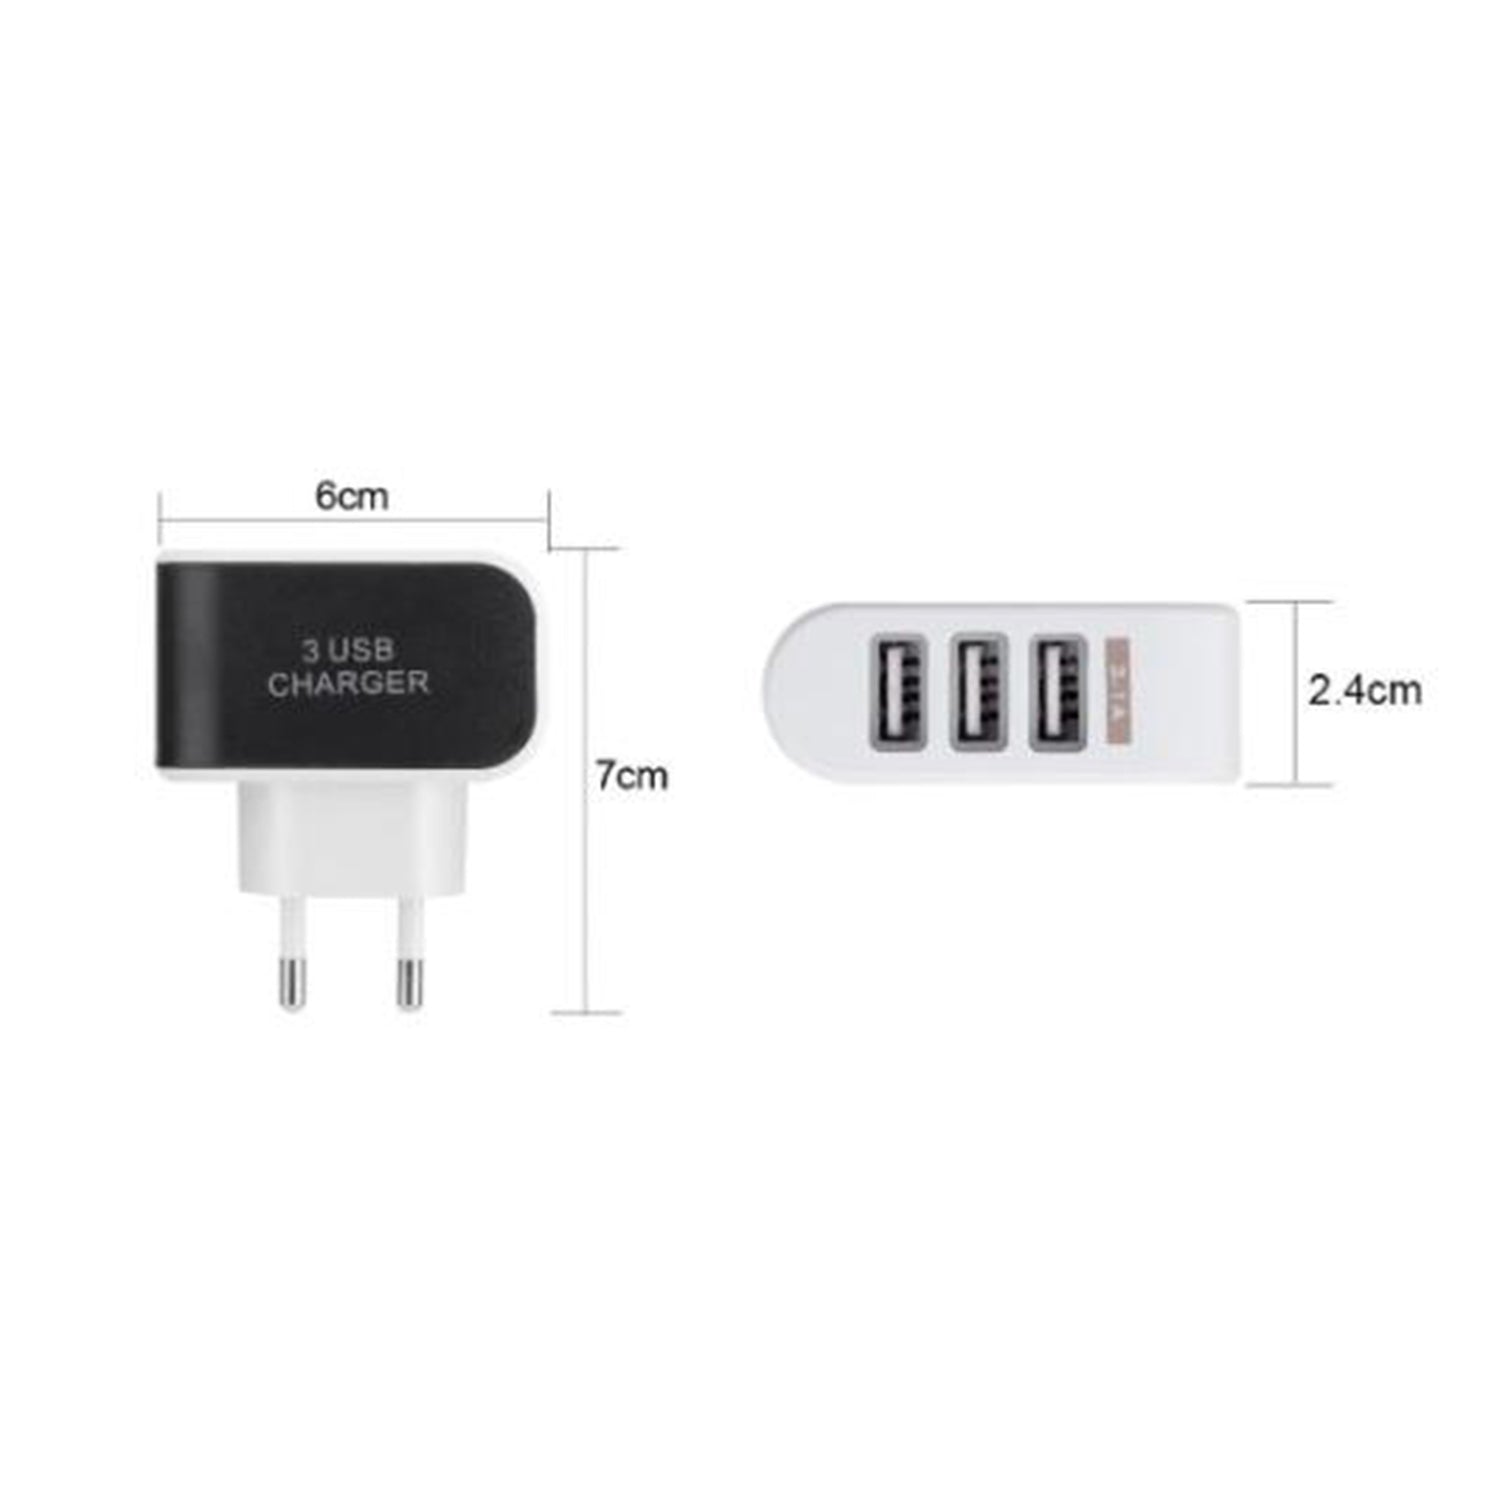 1705 Triple USB 3 Port Wall AC Adapter Charger for Mobile Phone (1Pc Only) Dukandaily